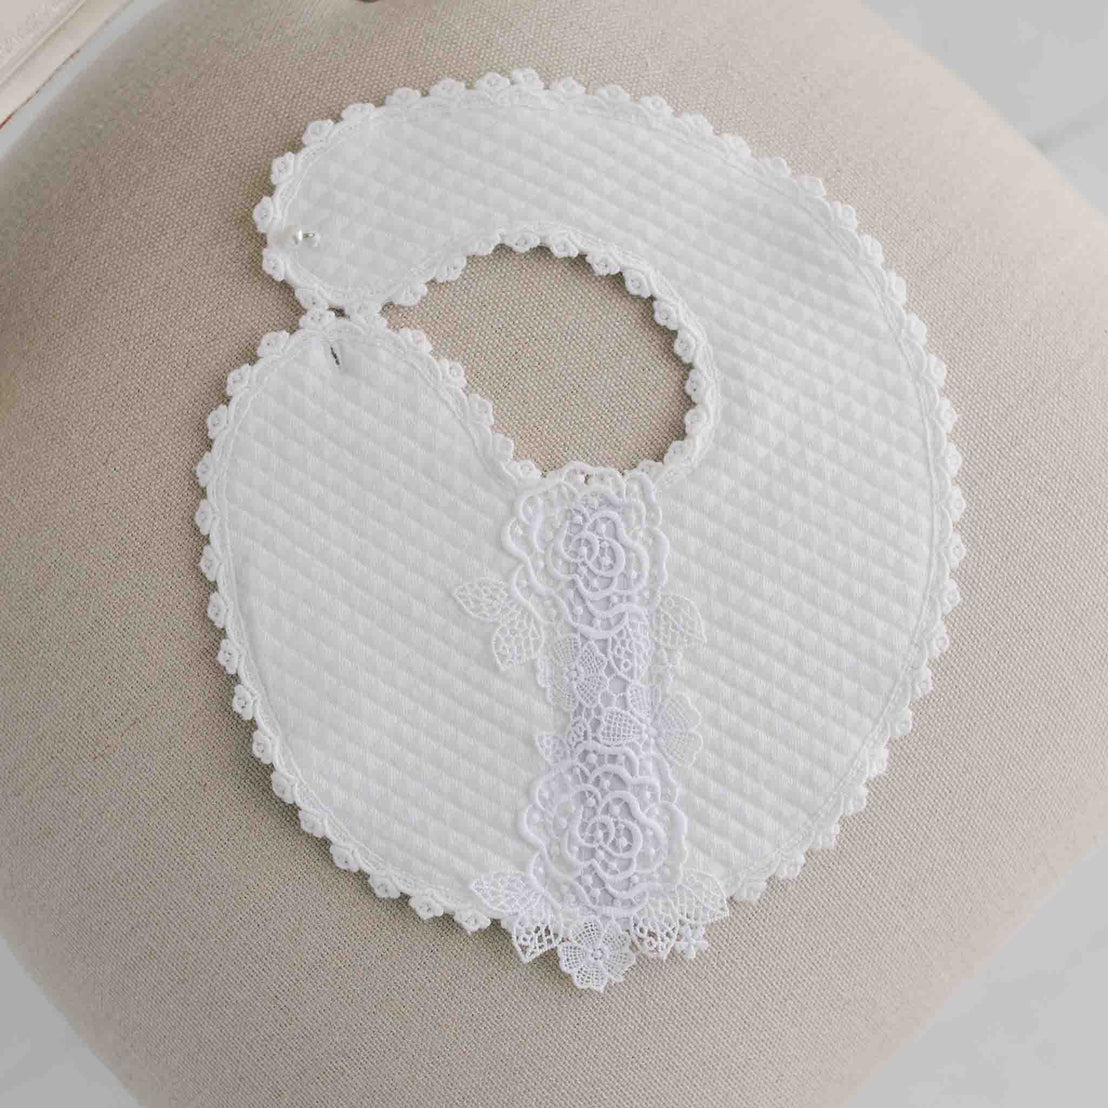 A white lace bib for babies, perfect for christening or baptism, featuring intricate floral patterns and scalloped edges, displayed on a light beige surface.